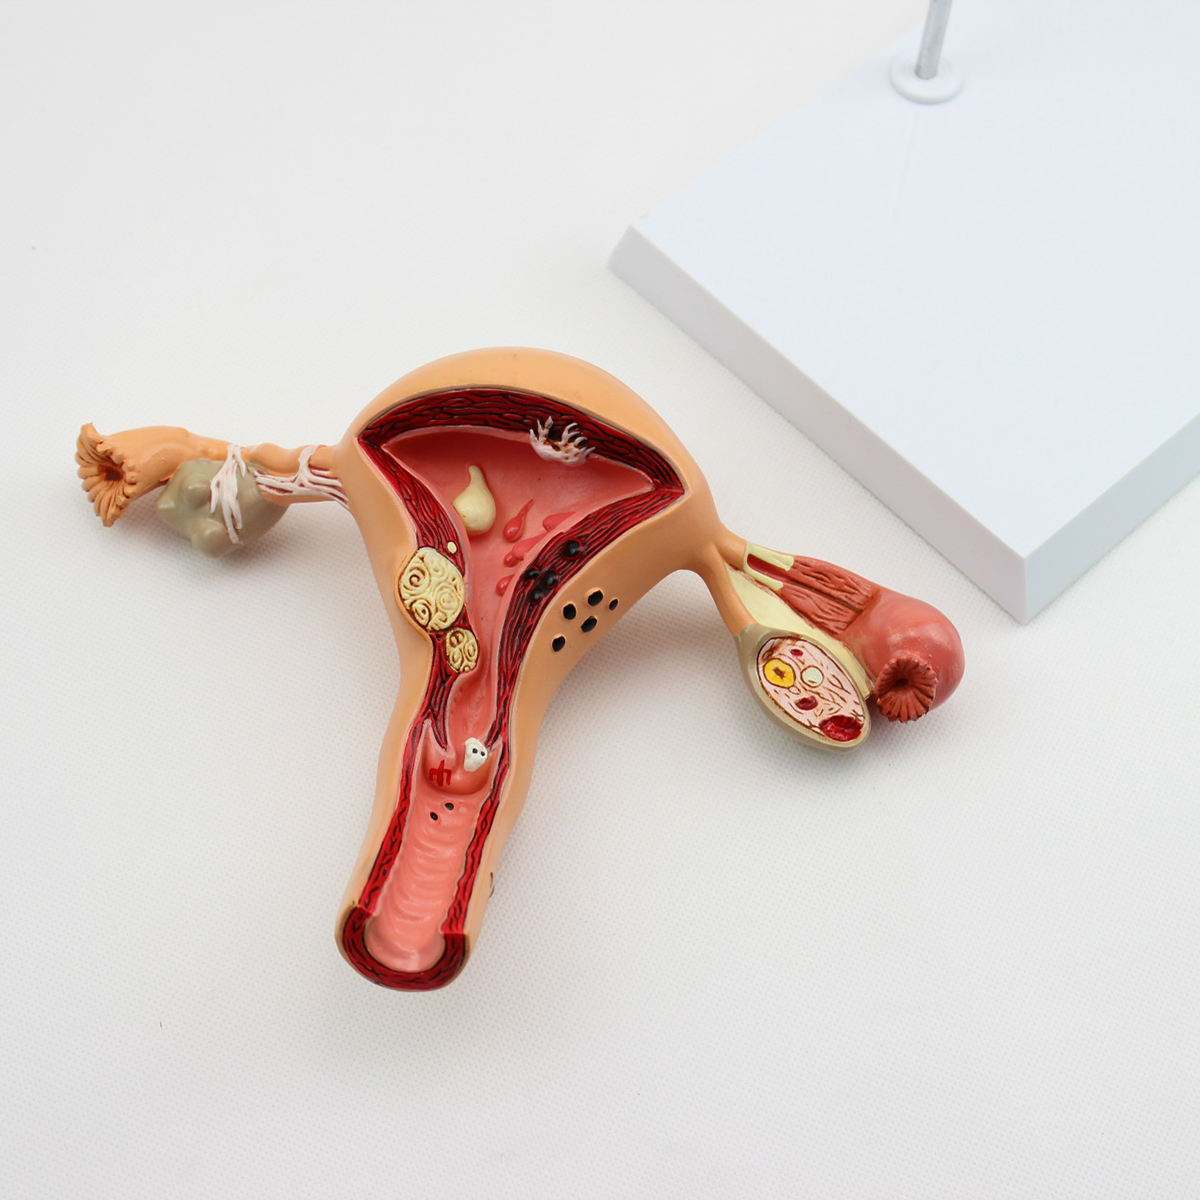 1Pcs-Uterus-Ovary-Anatomical-Medical--Model-Anatomy-Cross-Section-Science-Toy-With-Base-1422991-2